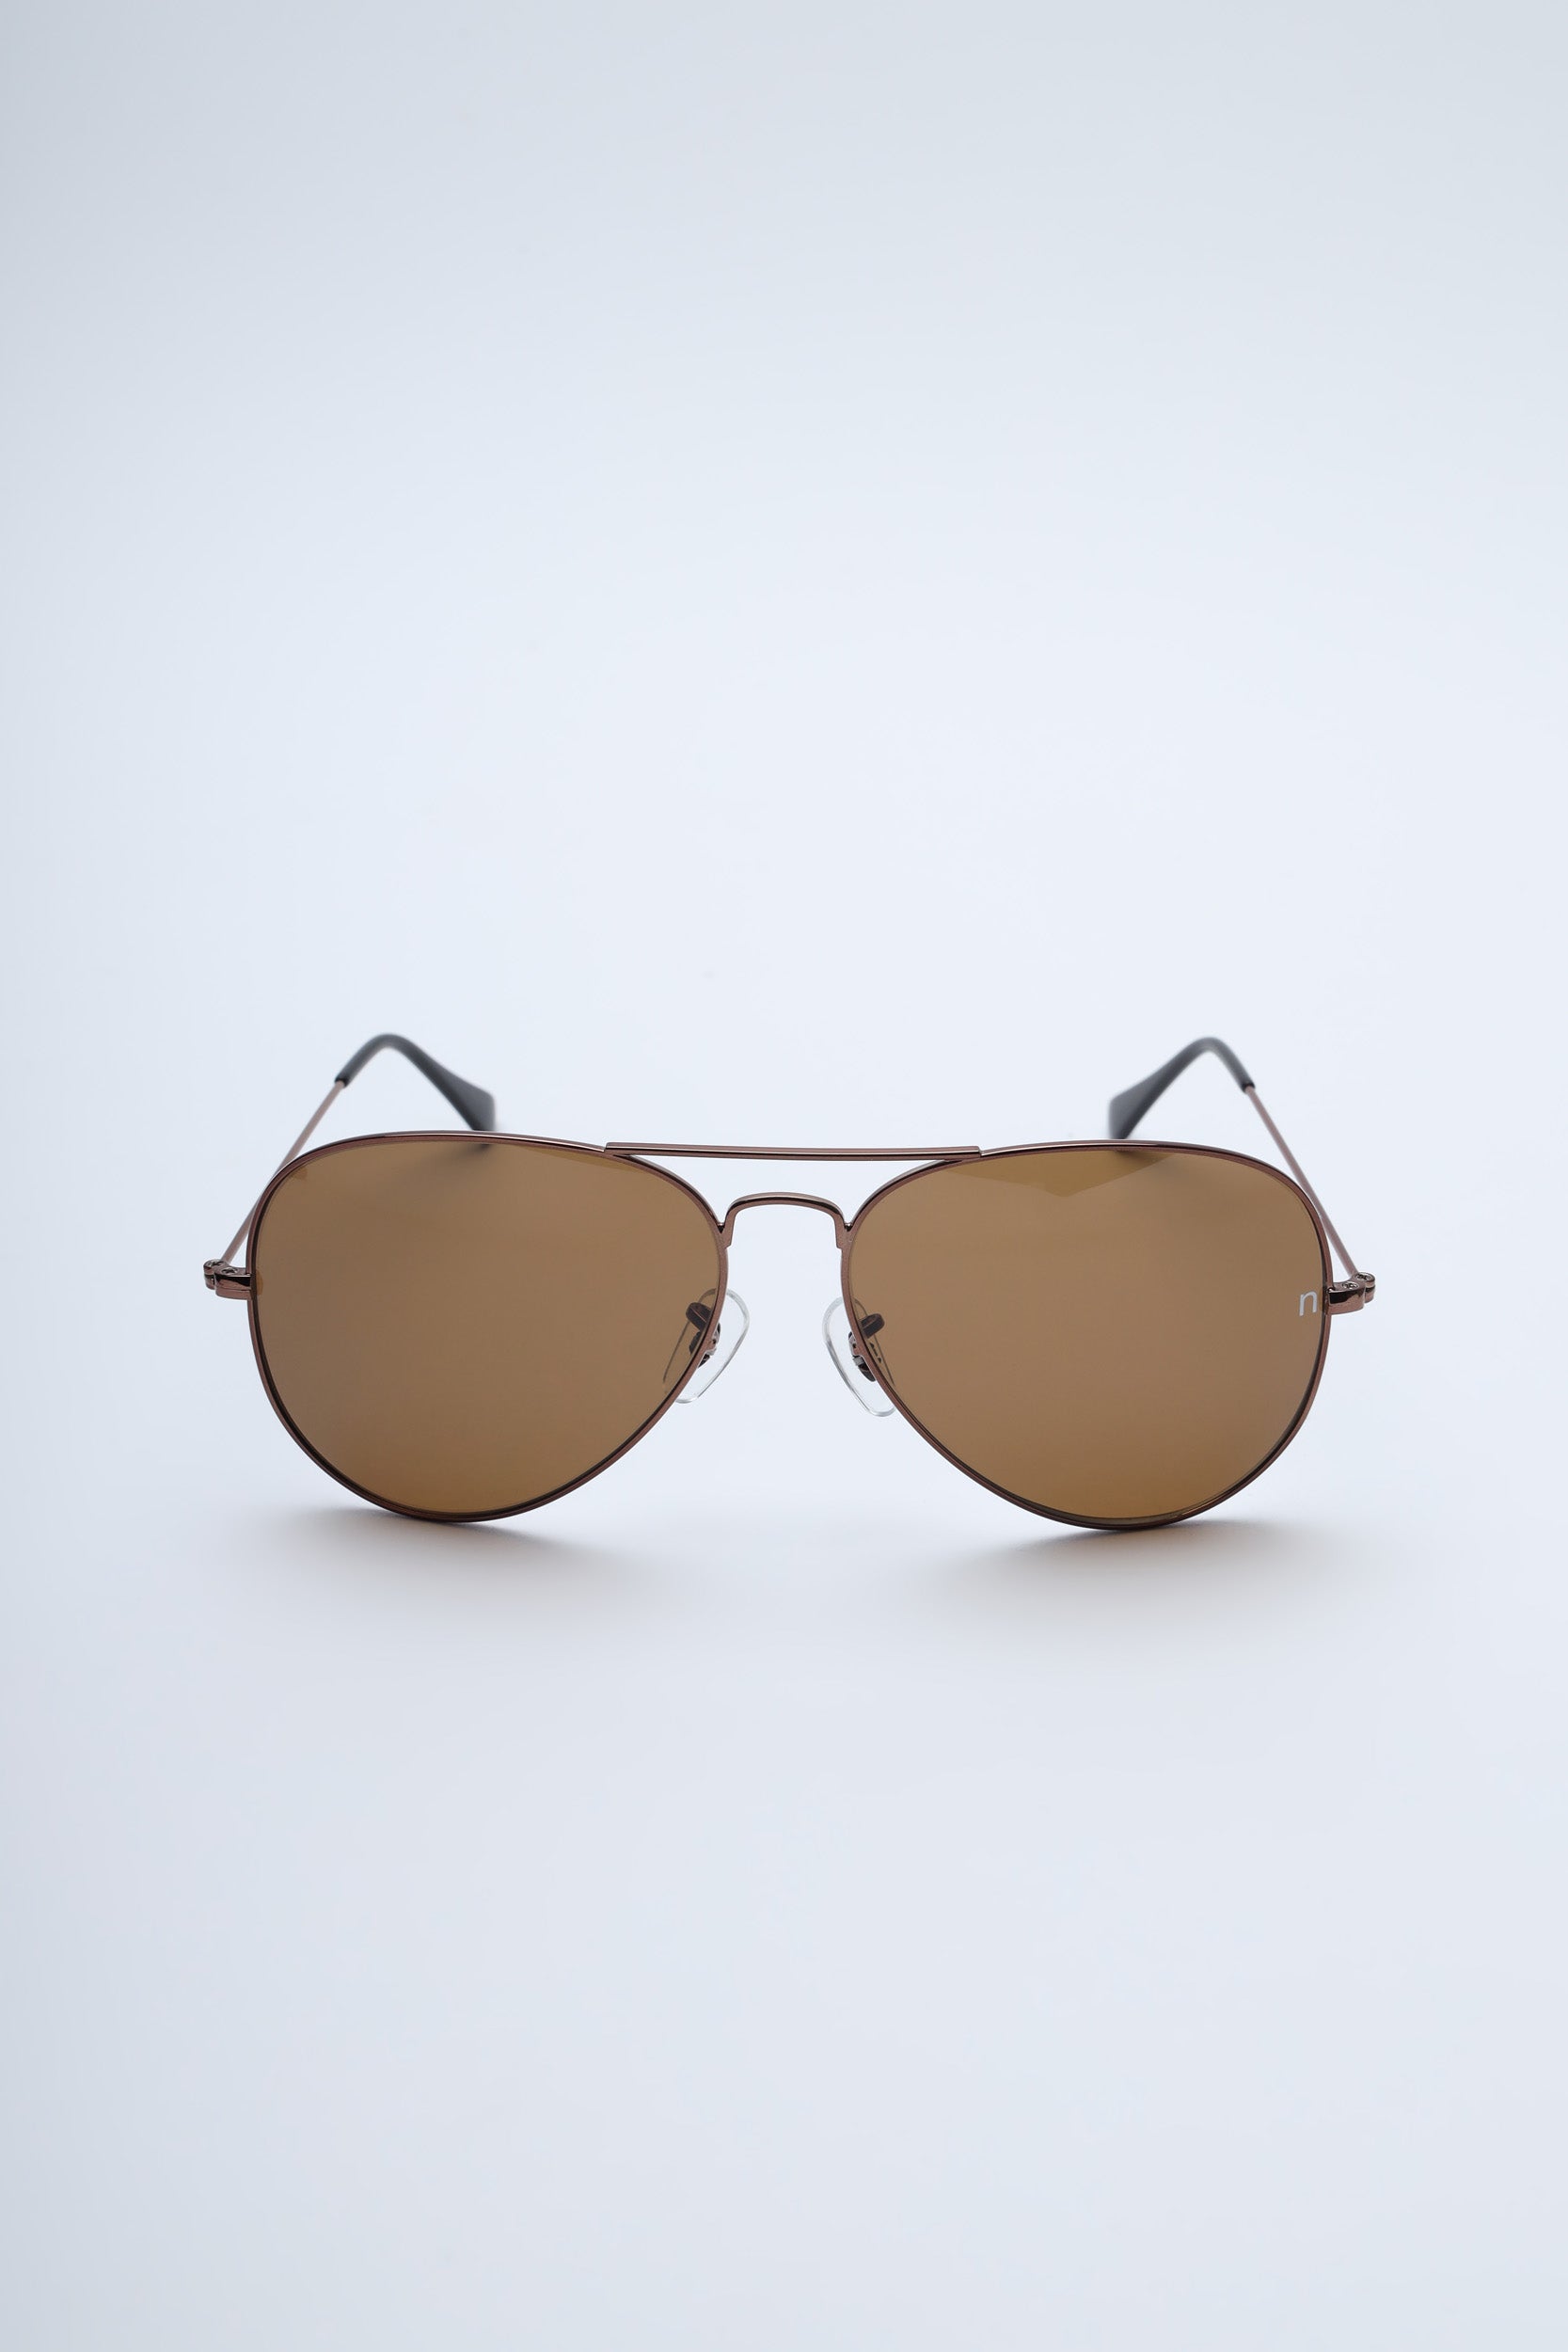 NS2003BRFBRL Aviator Stainless Steel Brown Frame with Brown Glass Lens